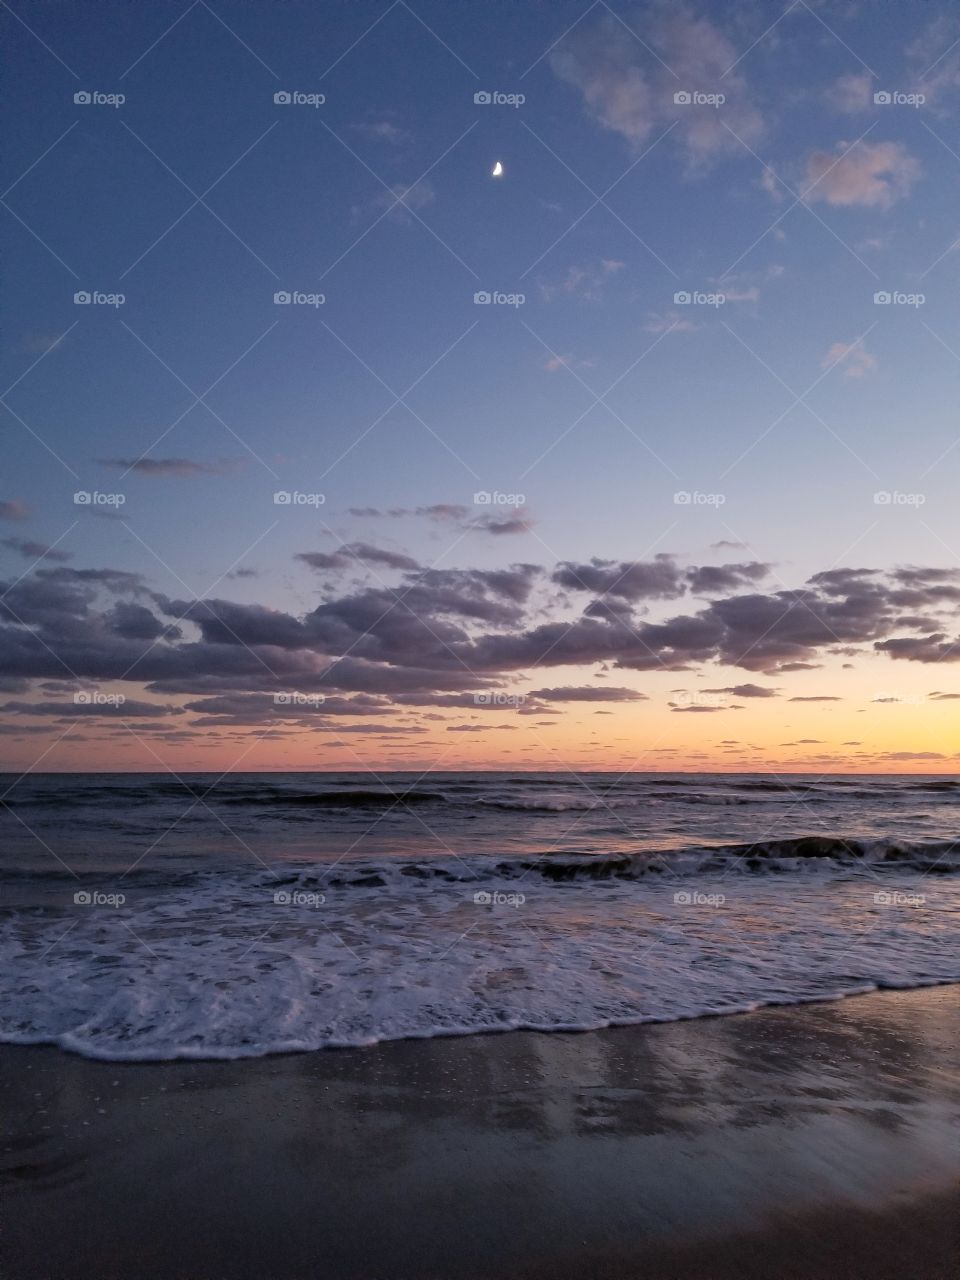 Beach Sunset and the Moon in North Carolina